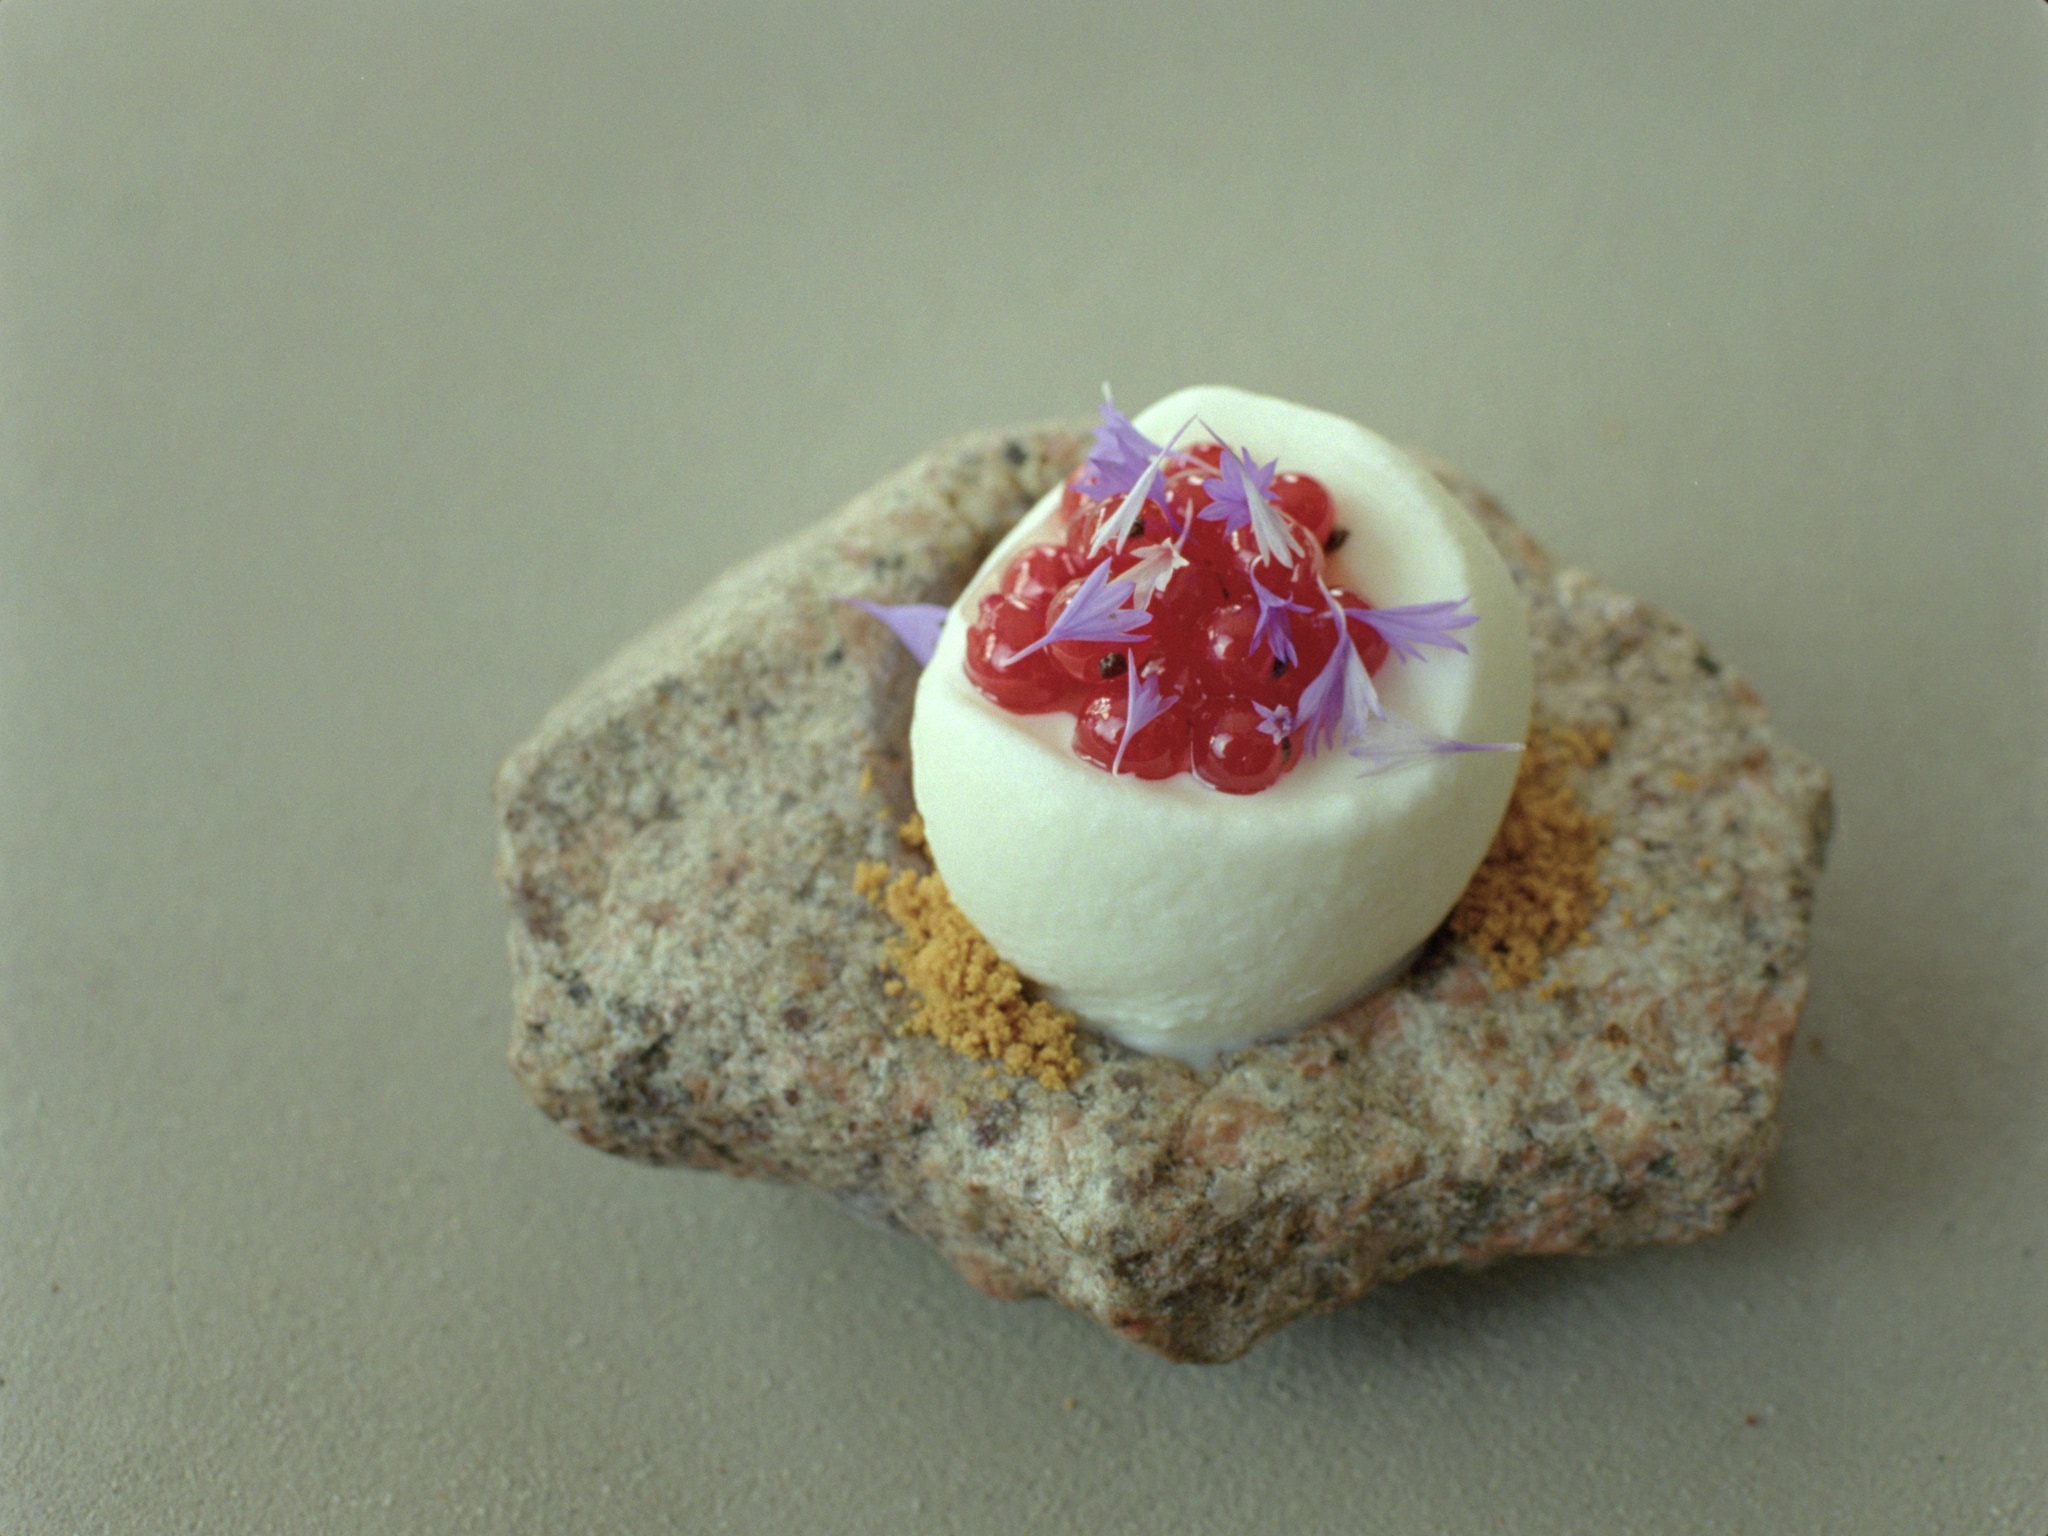 A small stone plate with ice cream, red currant and corn flower on a concrete table.